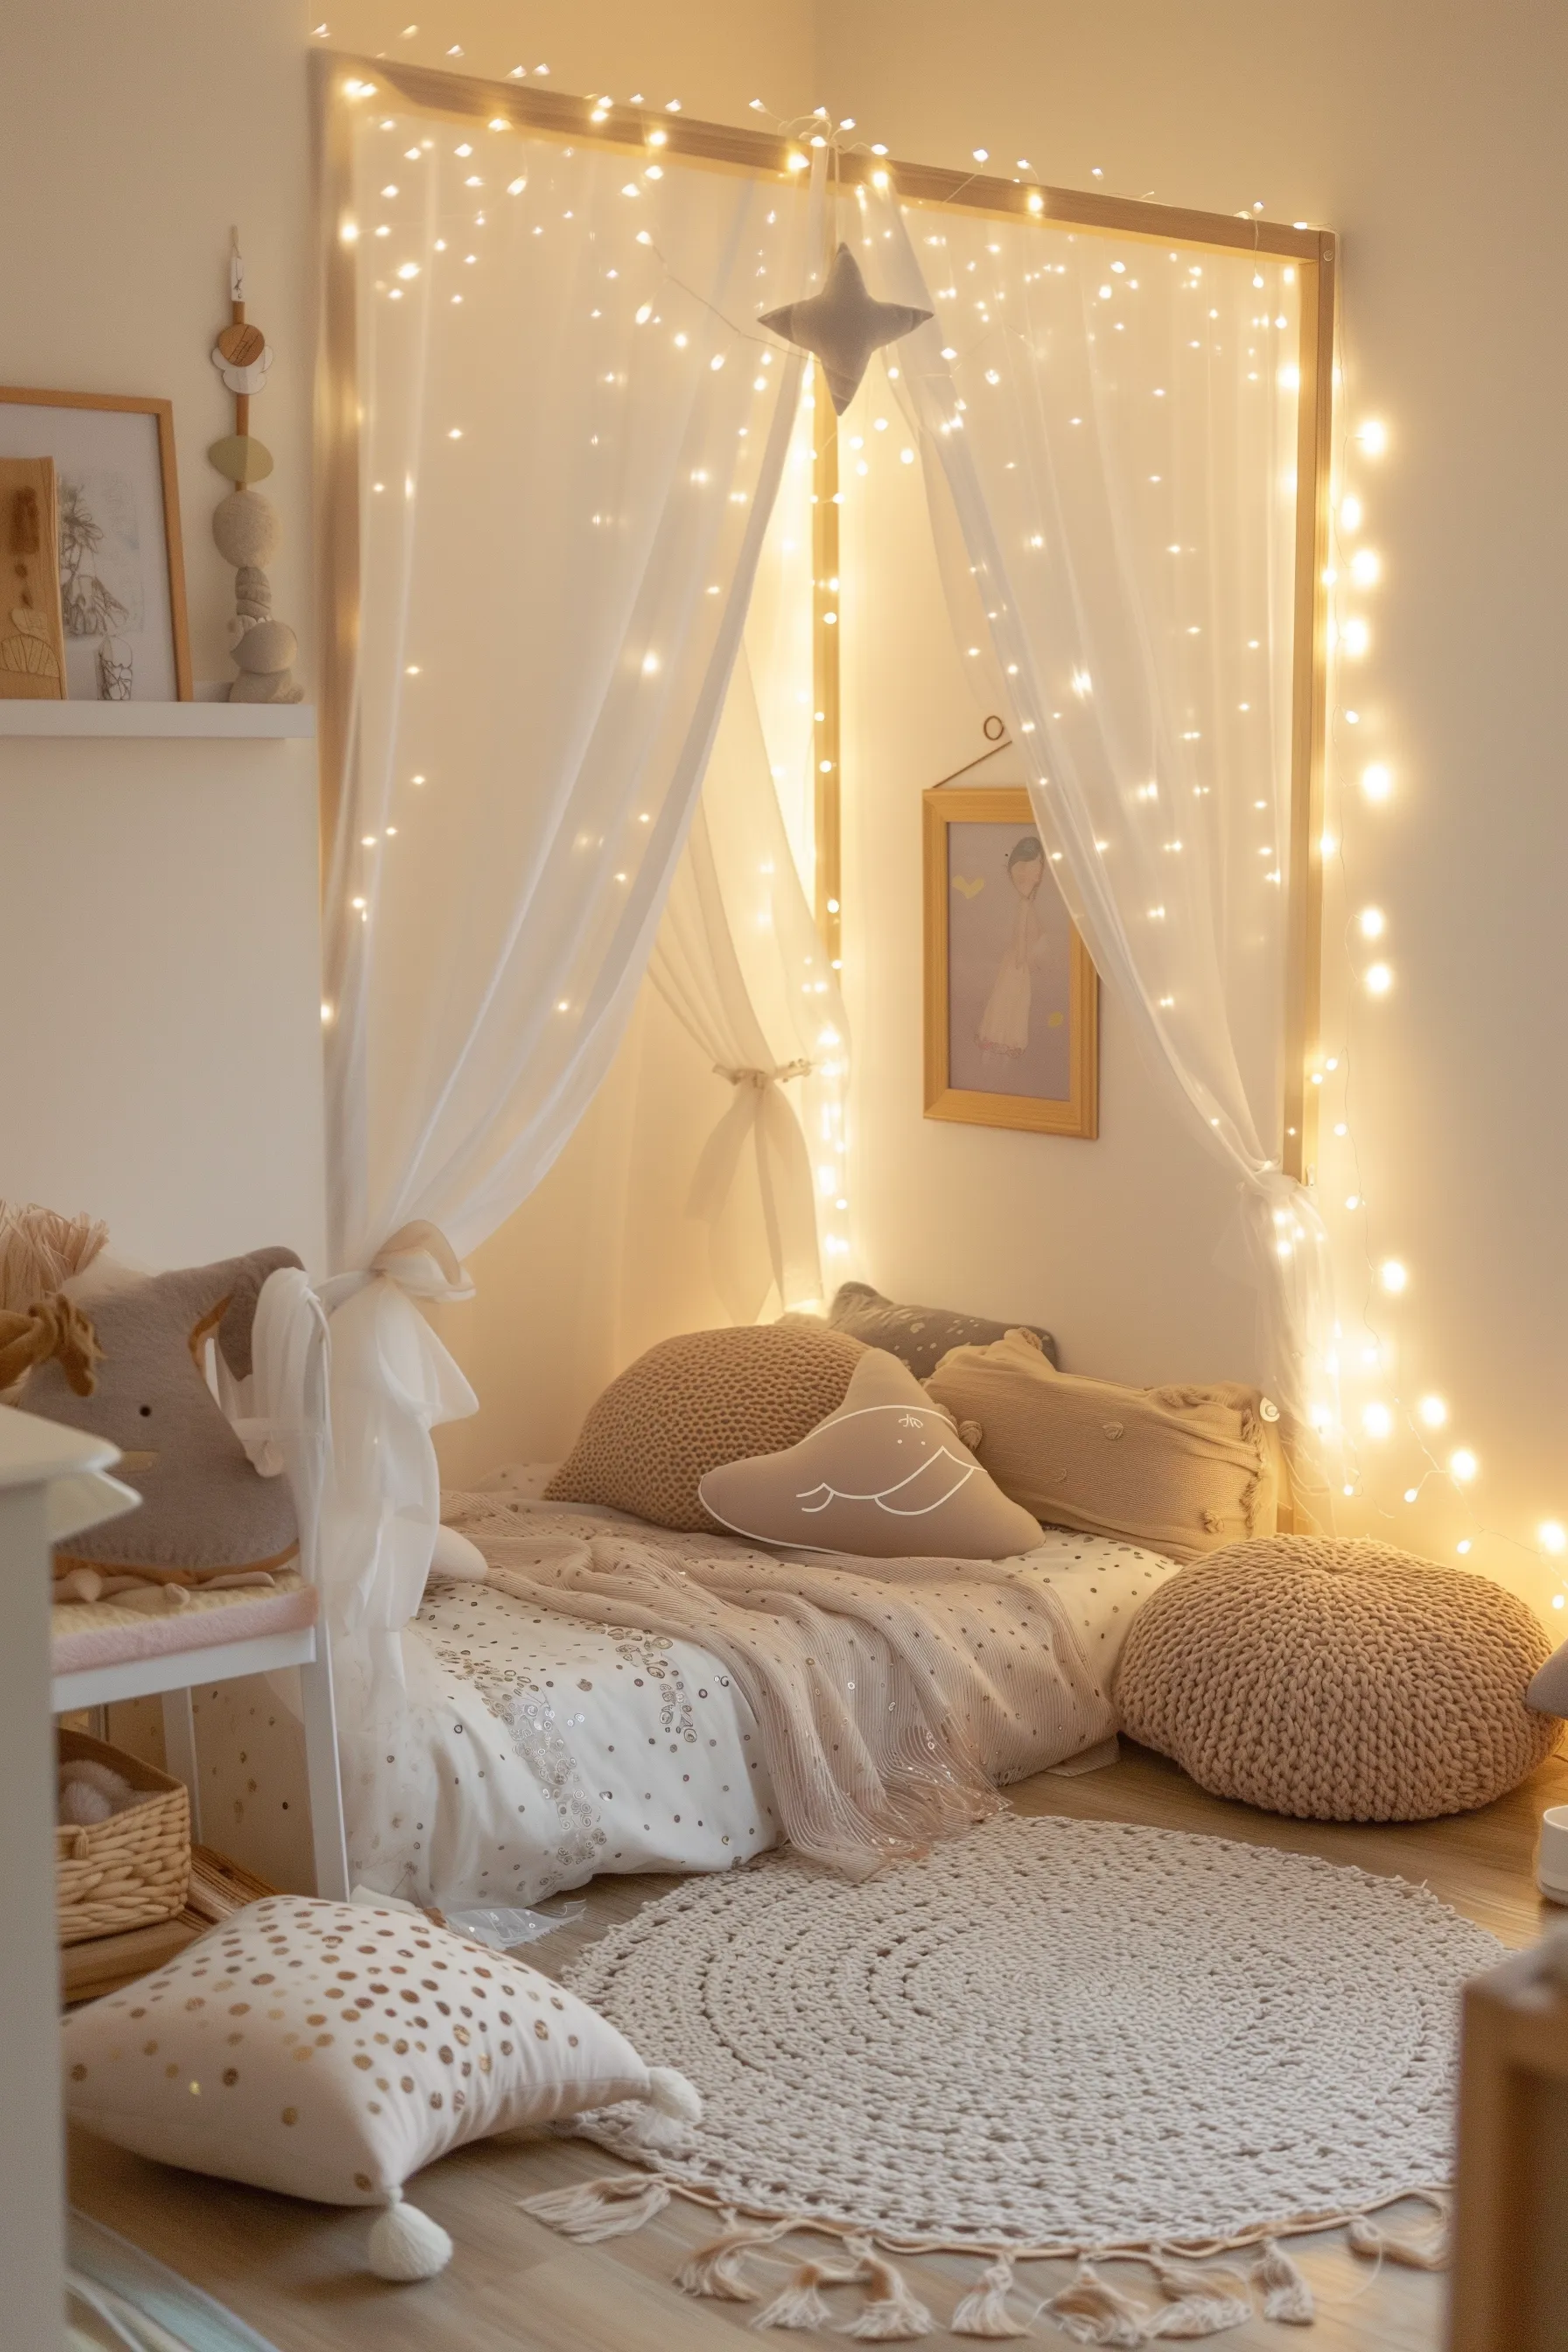 A white and brown bedroom with an ottoman, canopy and fairy lights